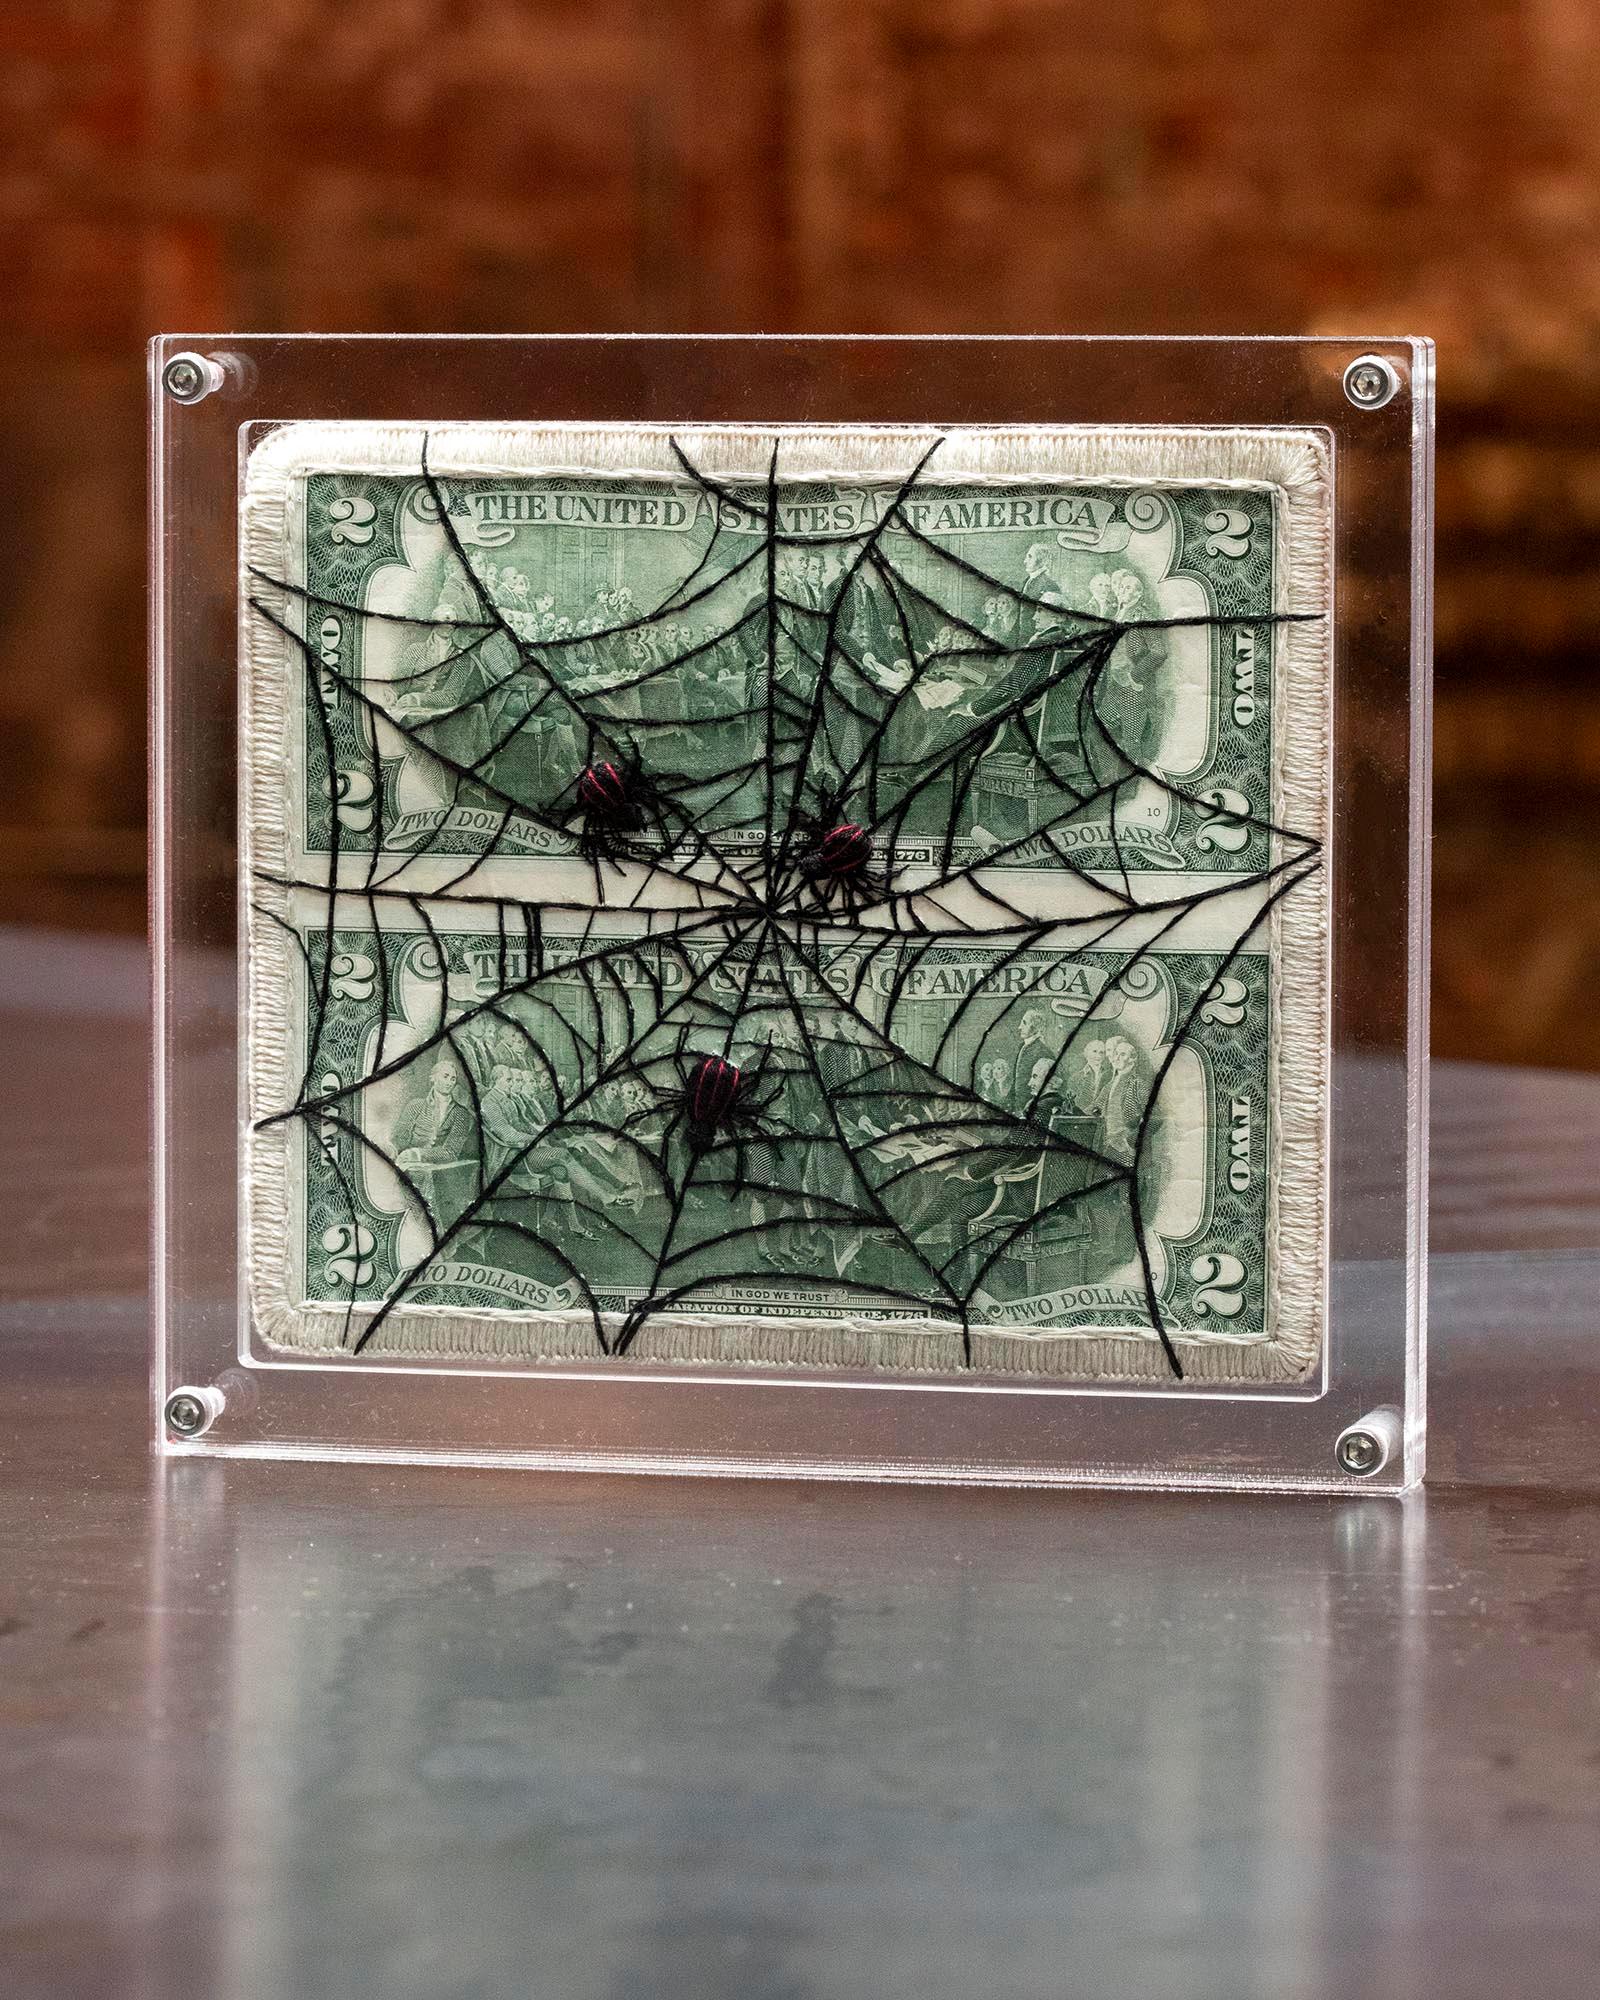 Uncut Two Dollar Web - Mixed Media Art by Stacey Lee Webber